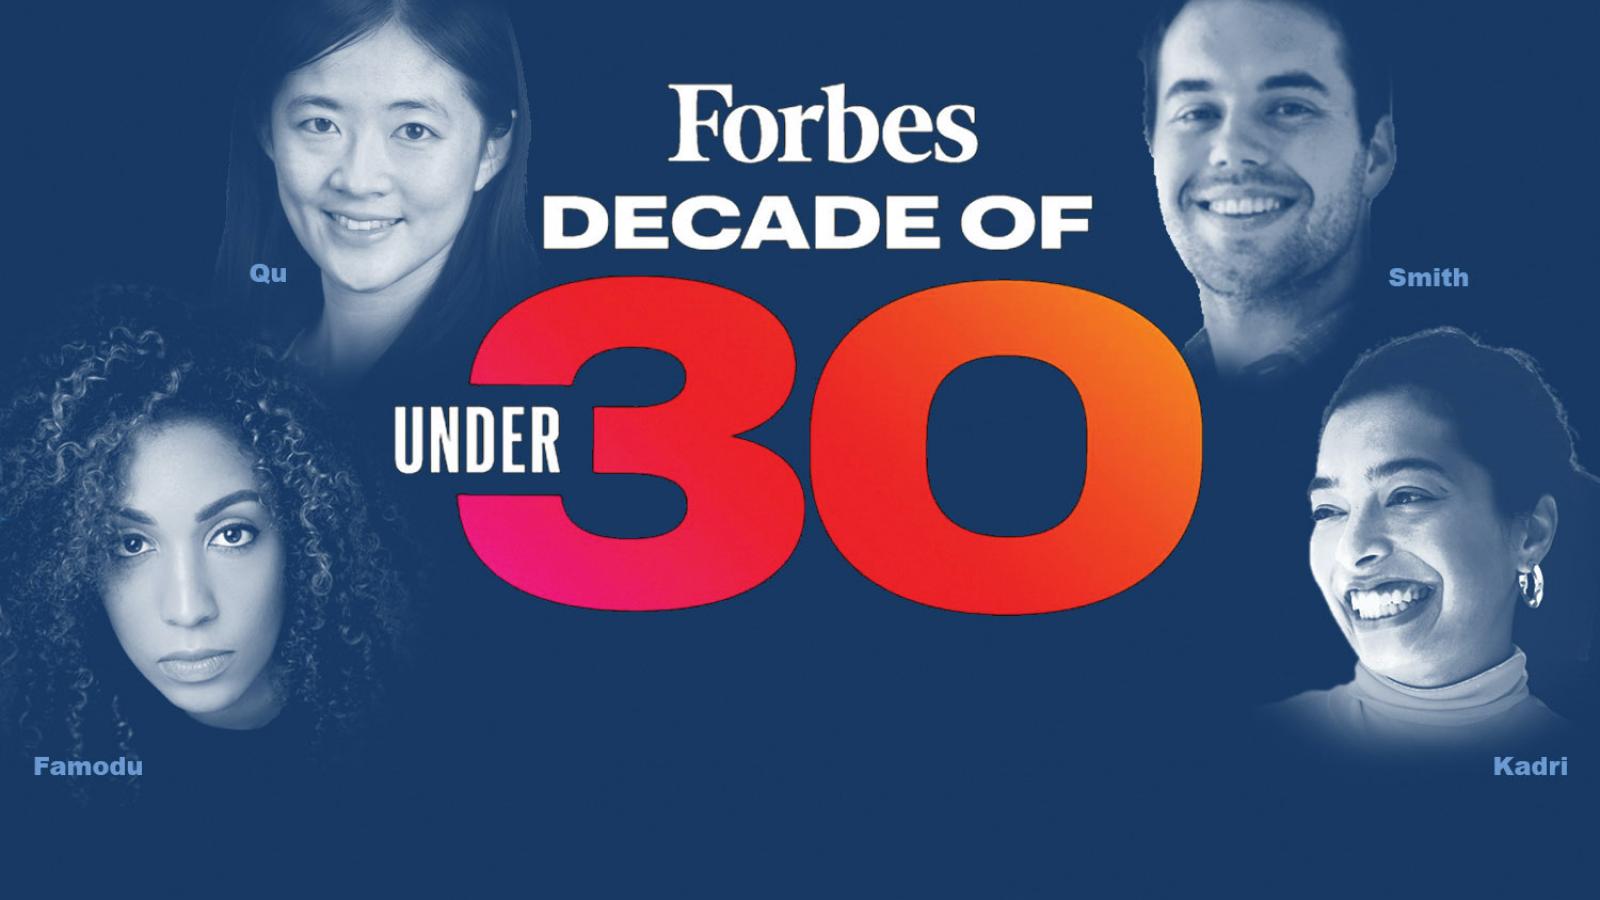 Photo illustration of honorees with Forbes 30 Under 30 logo